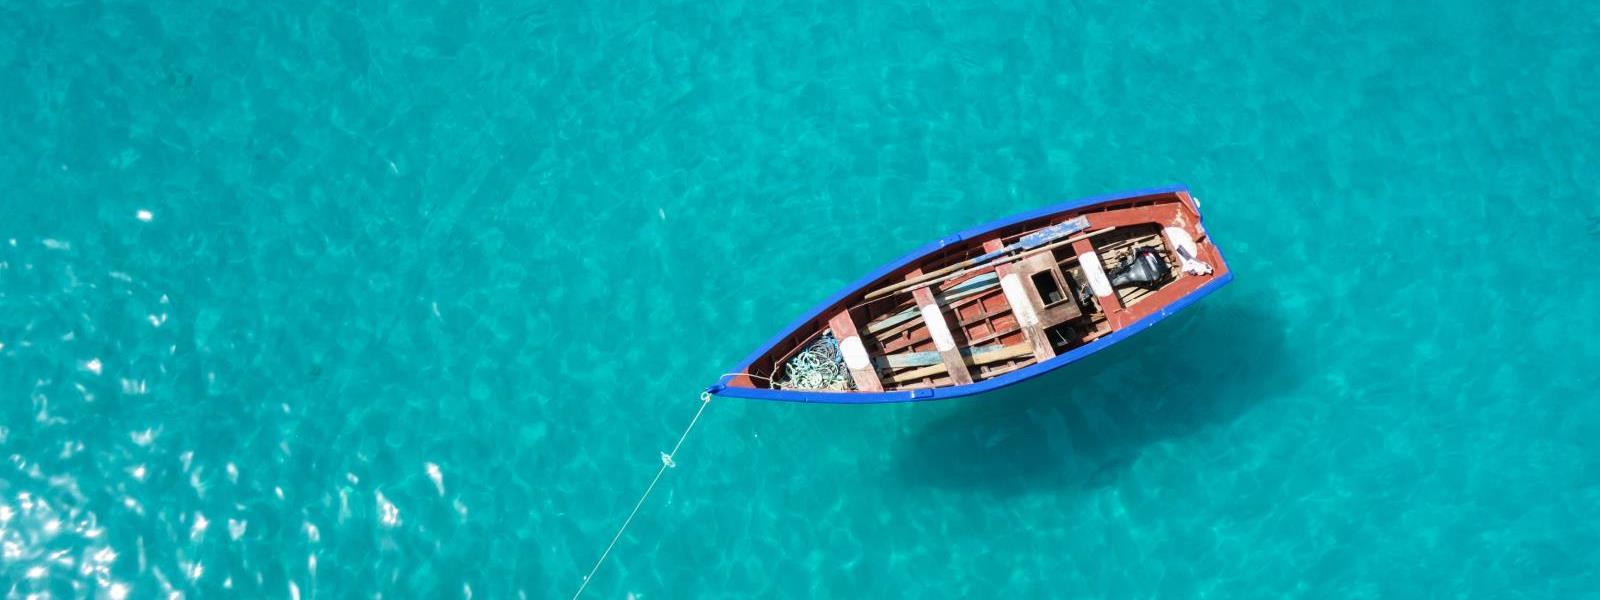 A boat floats on the bright blue ocean